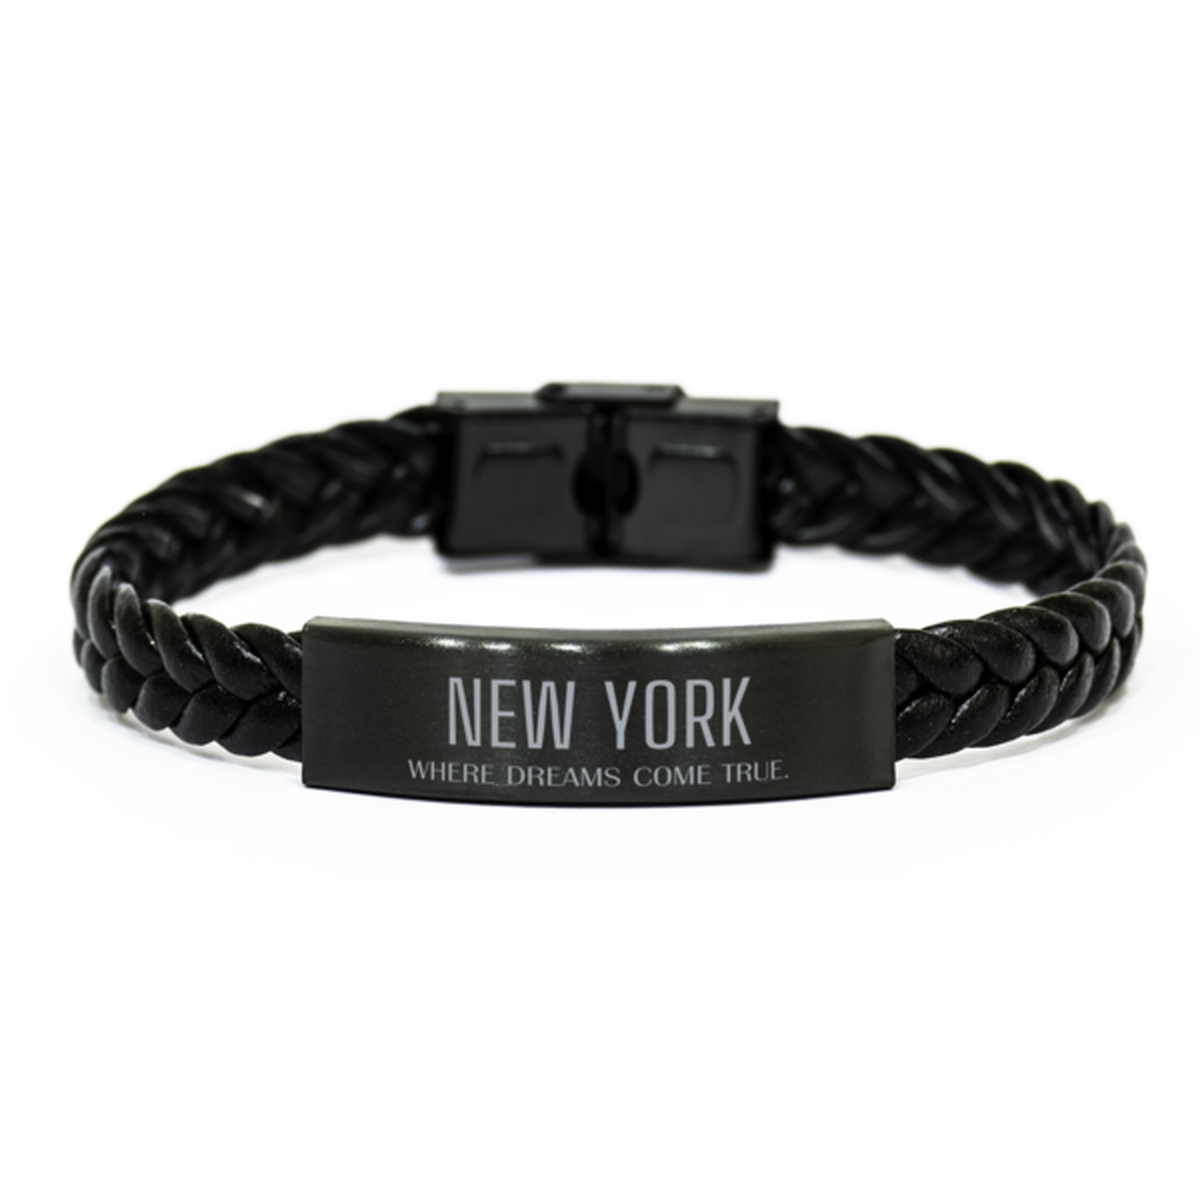 Love New York State Braided Leather Bracelet, New York Where dreams come true, Birthday Inspirational Gifts For New York Men, Women, Friends